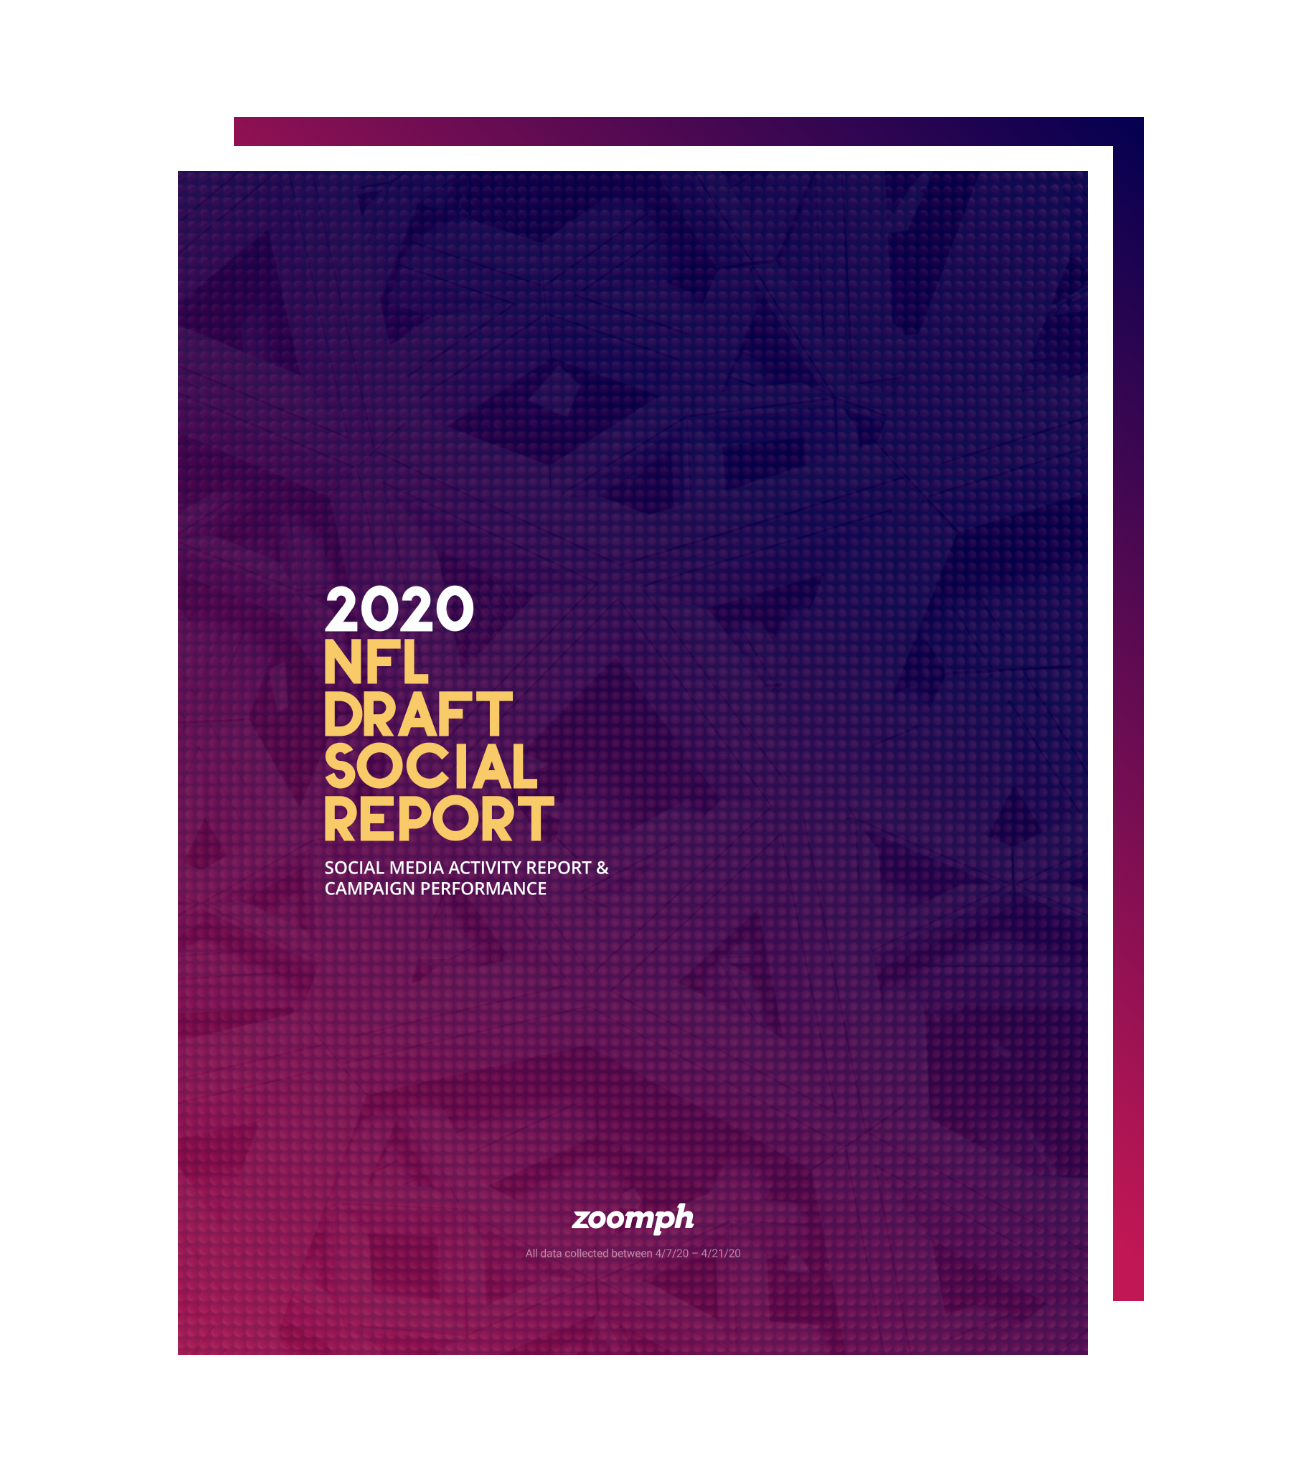 2020 NFL Draft Social Report Zoomph